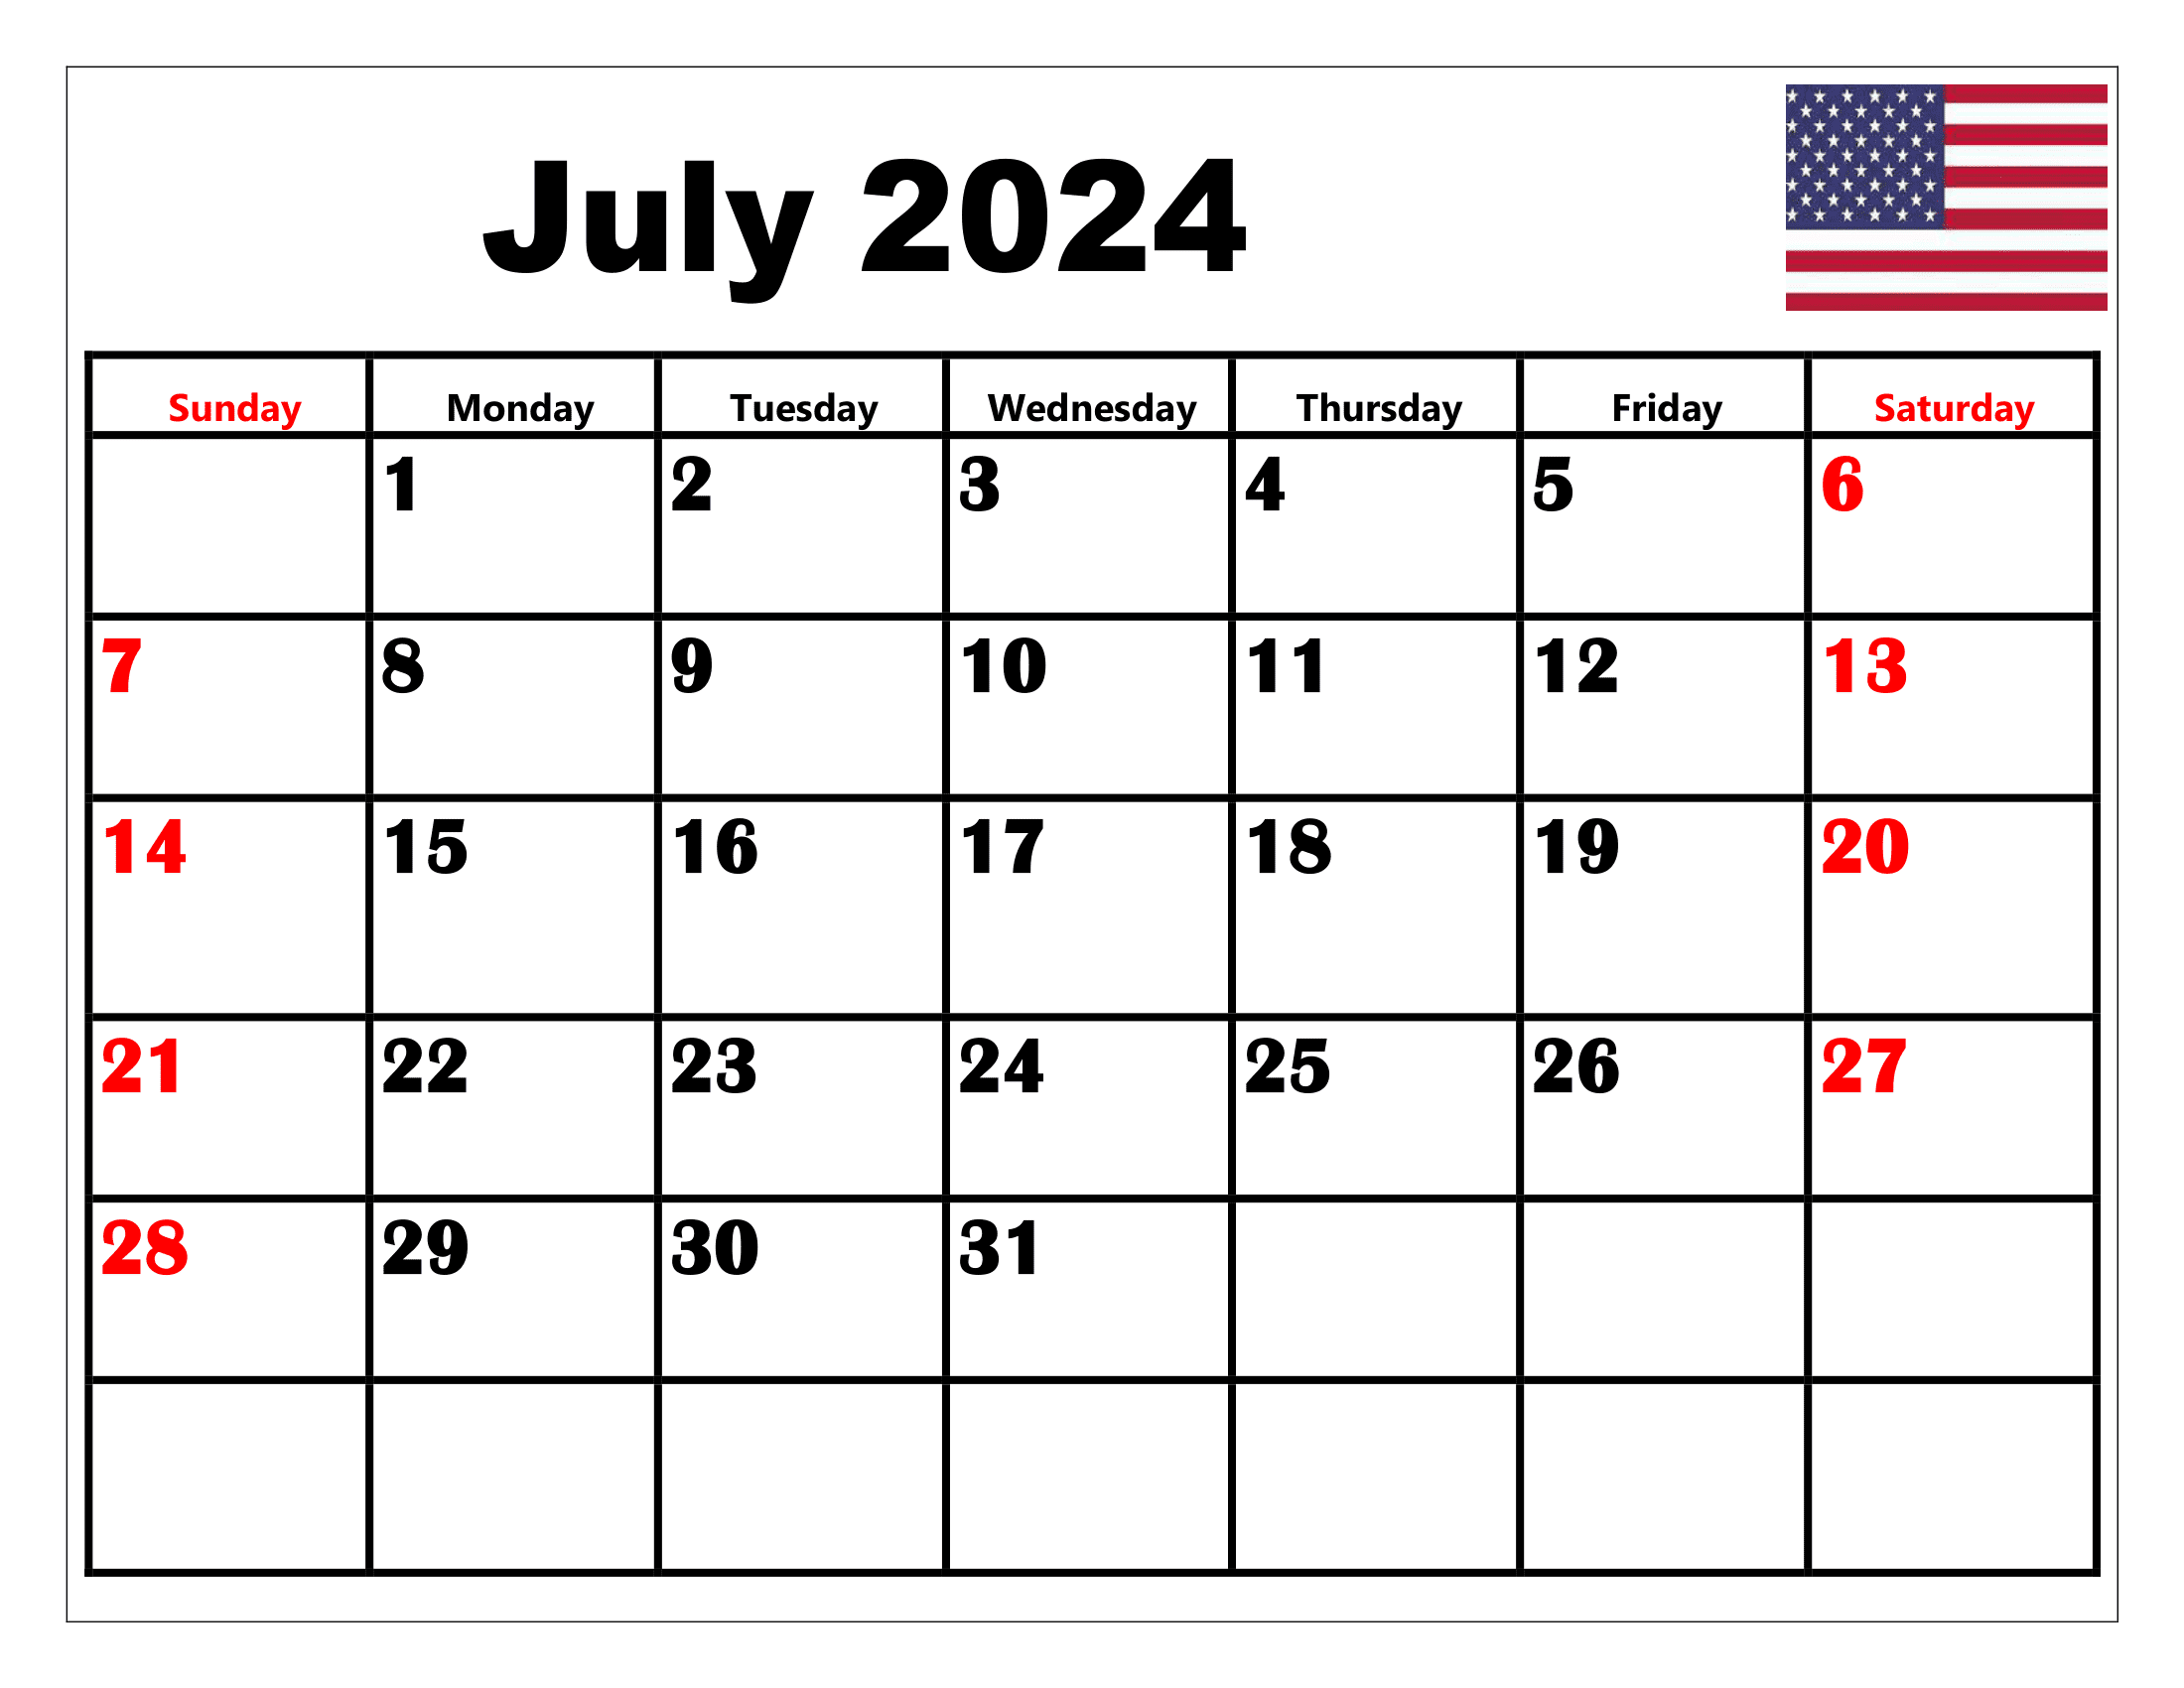 July 2024 Calendar Printable Pdf With Holidays Free Template in July Holiday Calendar 2024